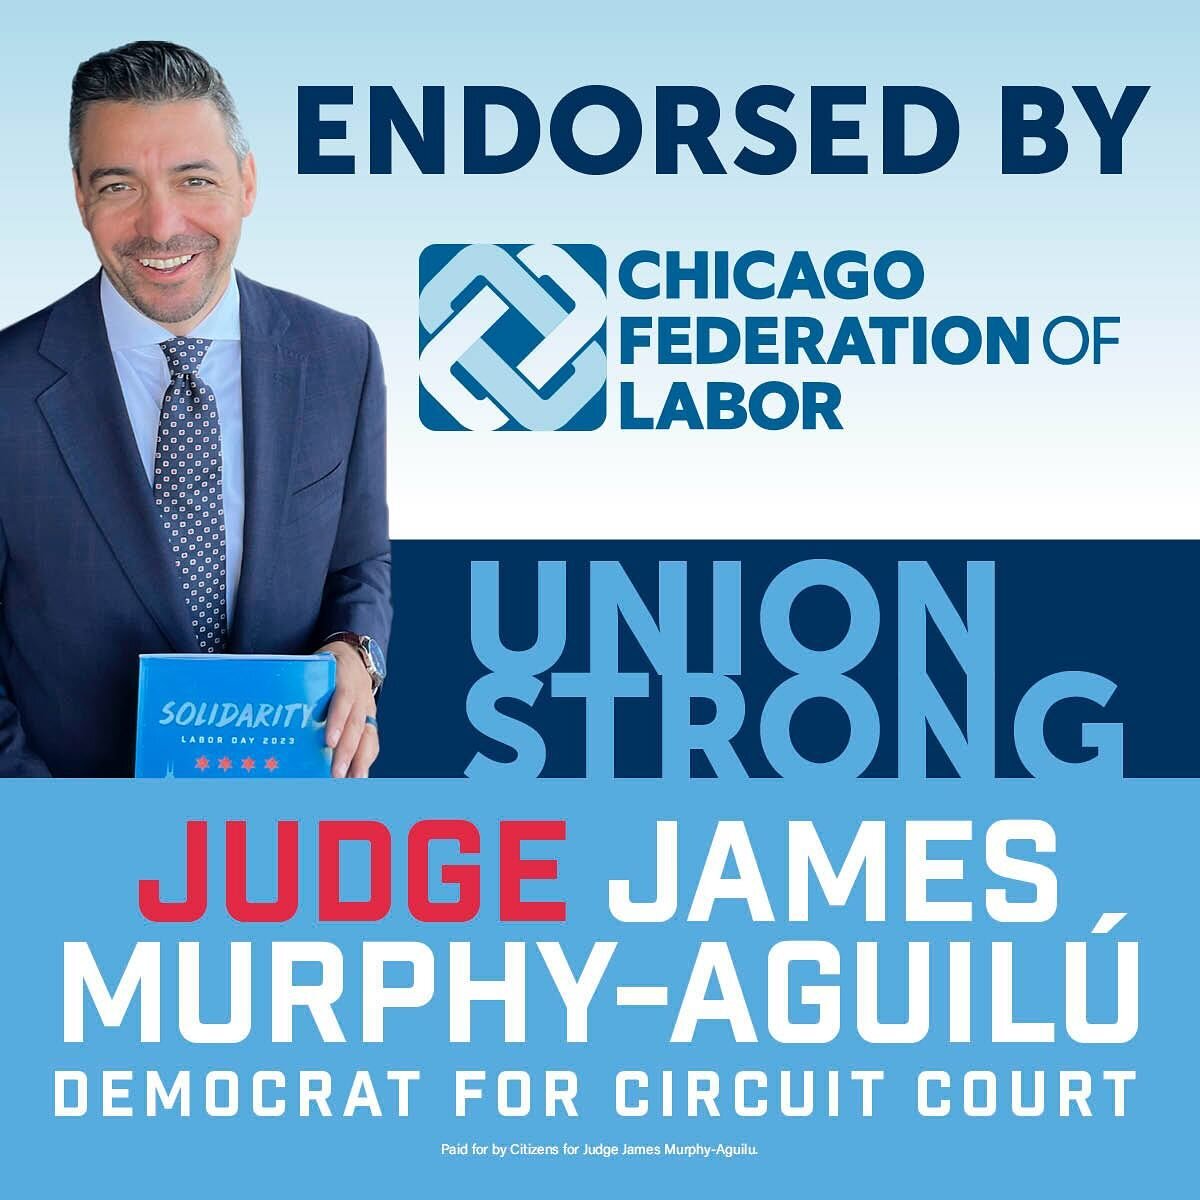 I am extremely proud to be endorsed by the Chicago Federation of Labor. Thank you to the CFL leadership for the honor.